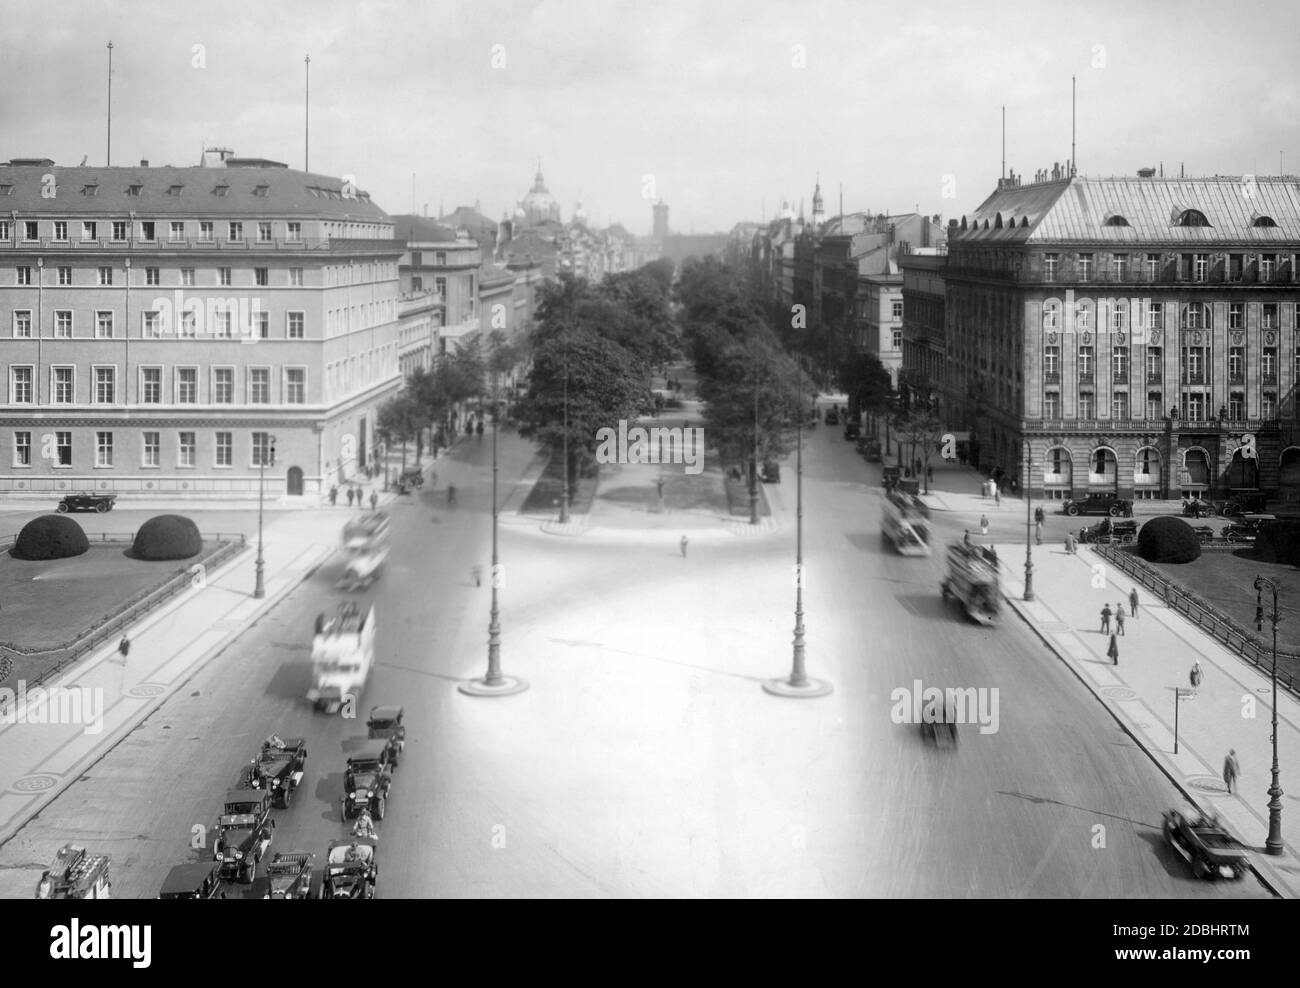 The picture shows the boulevard Unter den Linden in Berlin in 1926, photographed from the Brandenburg Gate. On the right is the Hotel Adlon. Stock Photo